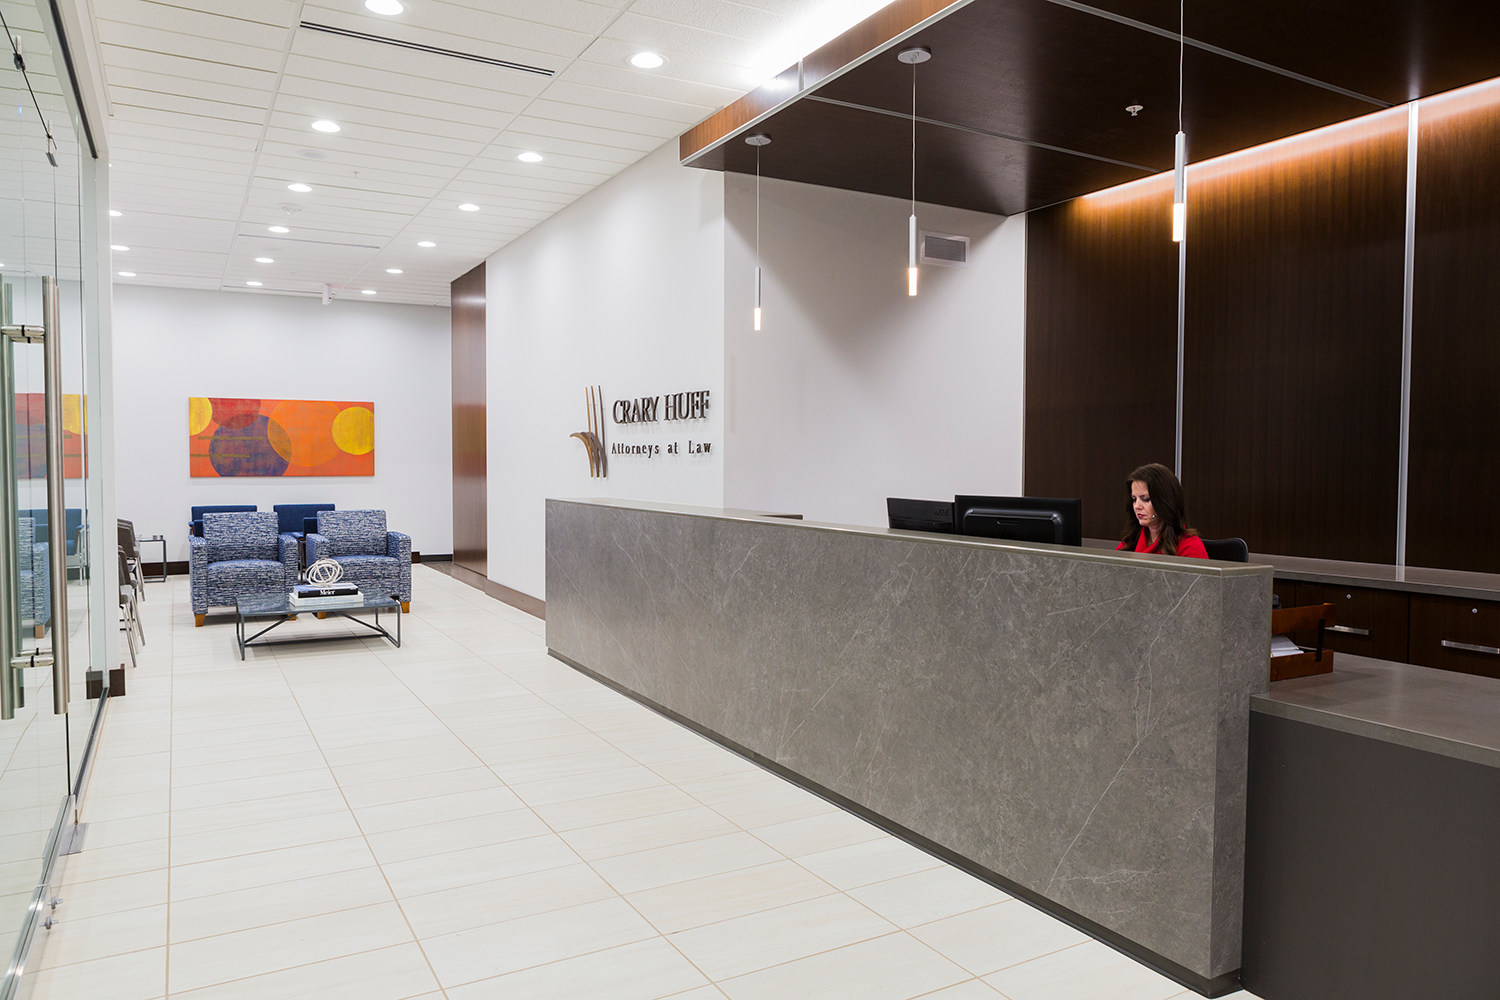 CMBA Architects Crary Huff Law Firm Entry